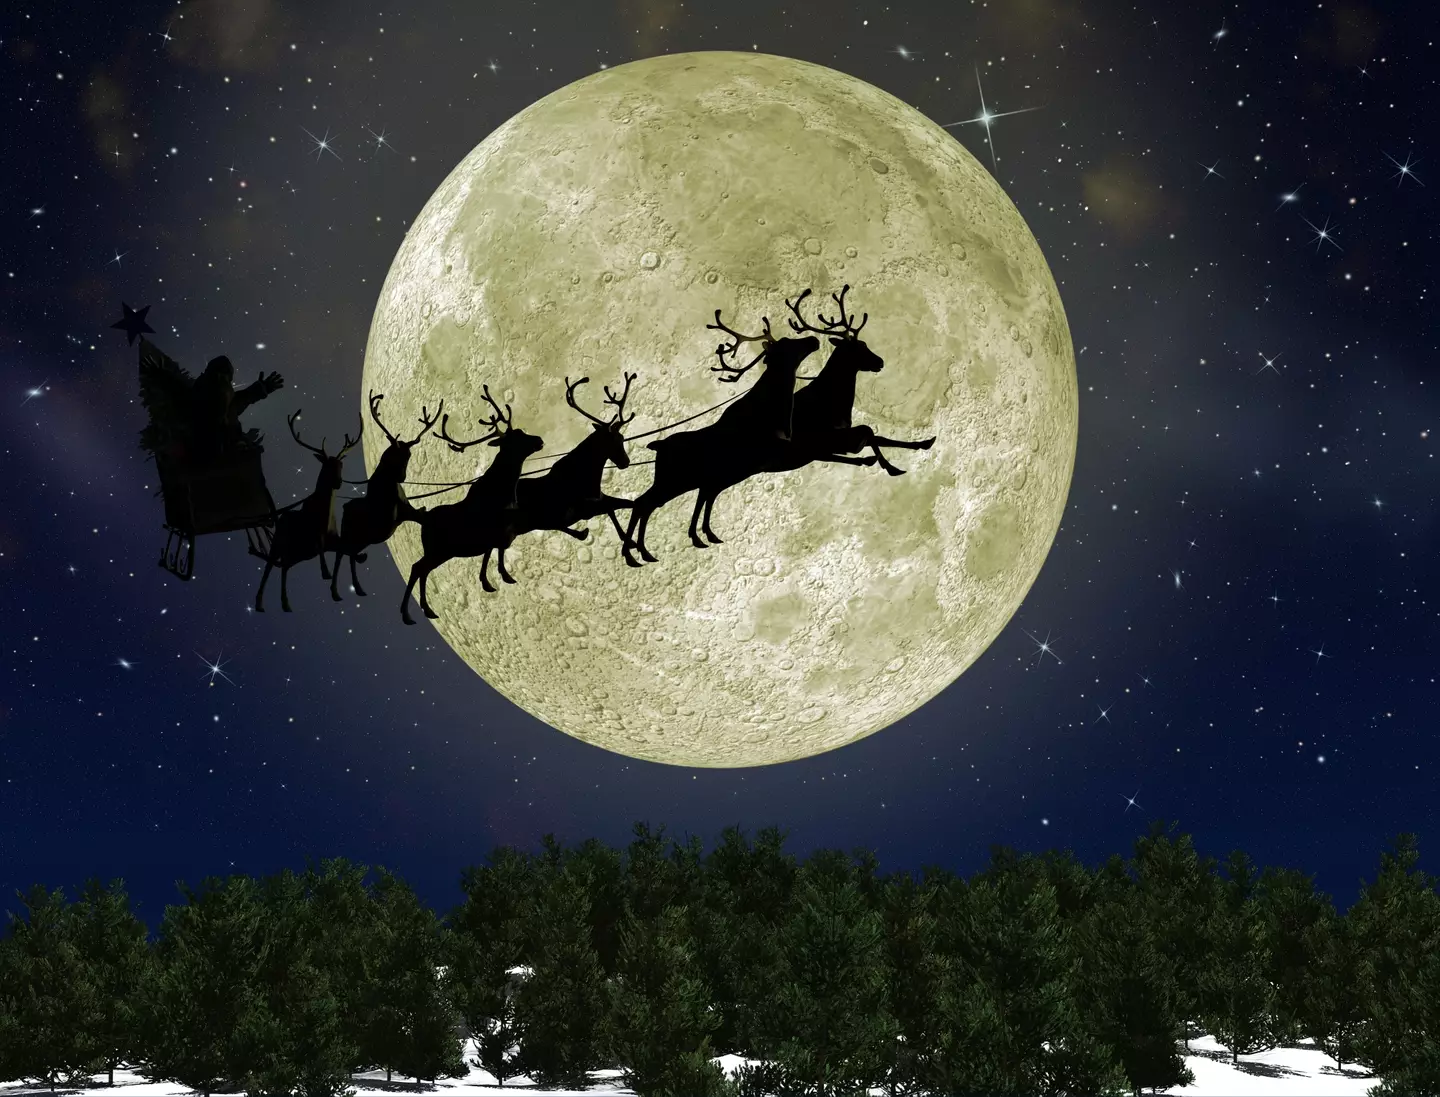 NORAD said that Santa is still flying despite the technical issues with the tracker.